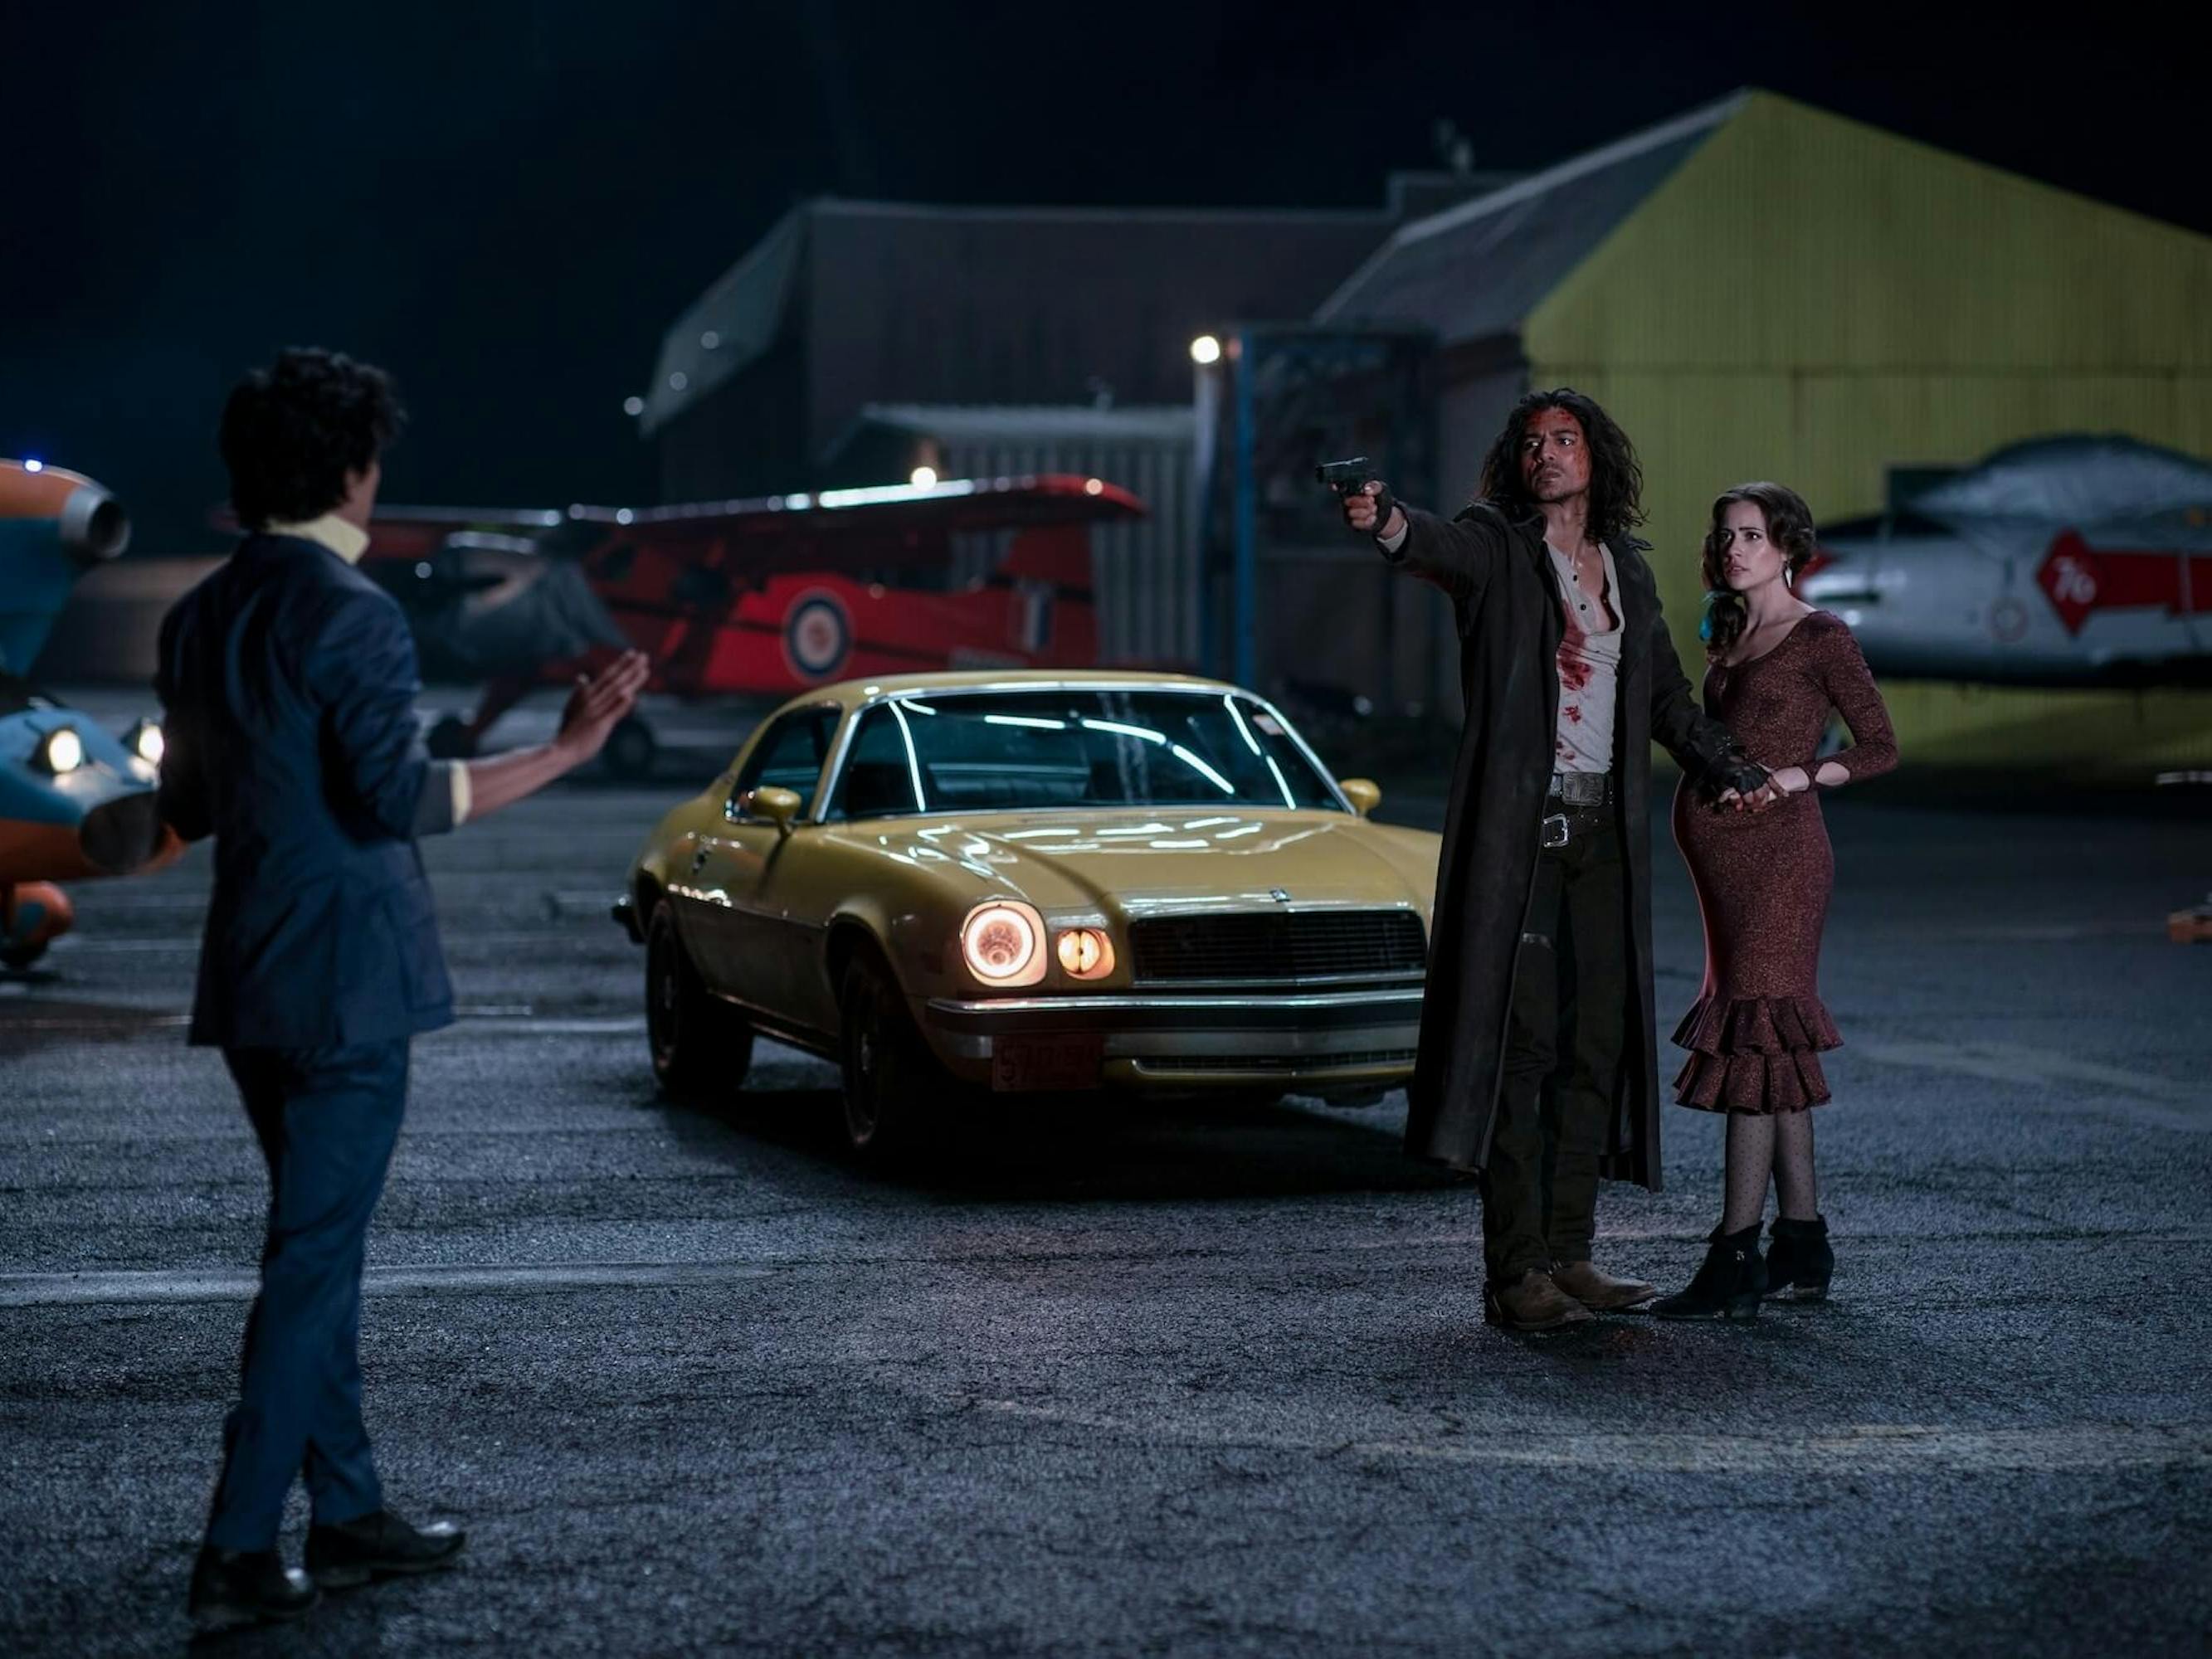 John Cho, Jan Uddin, and Lydia Peckham face off in a parkinglot filled with planes. Uddin points a gun at Cho as he shields a pregnant Peckham. Behind the duo is a yellow car.